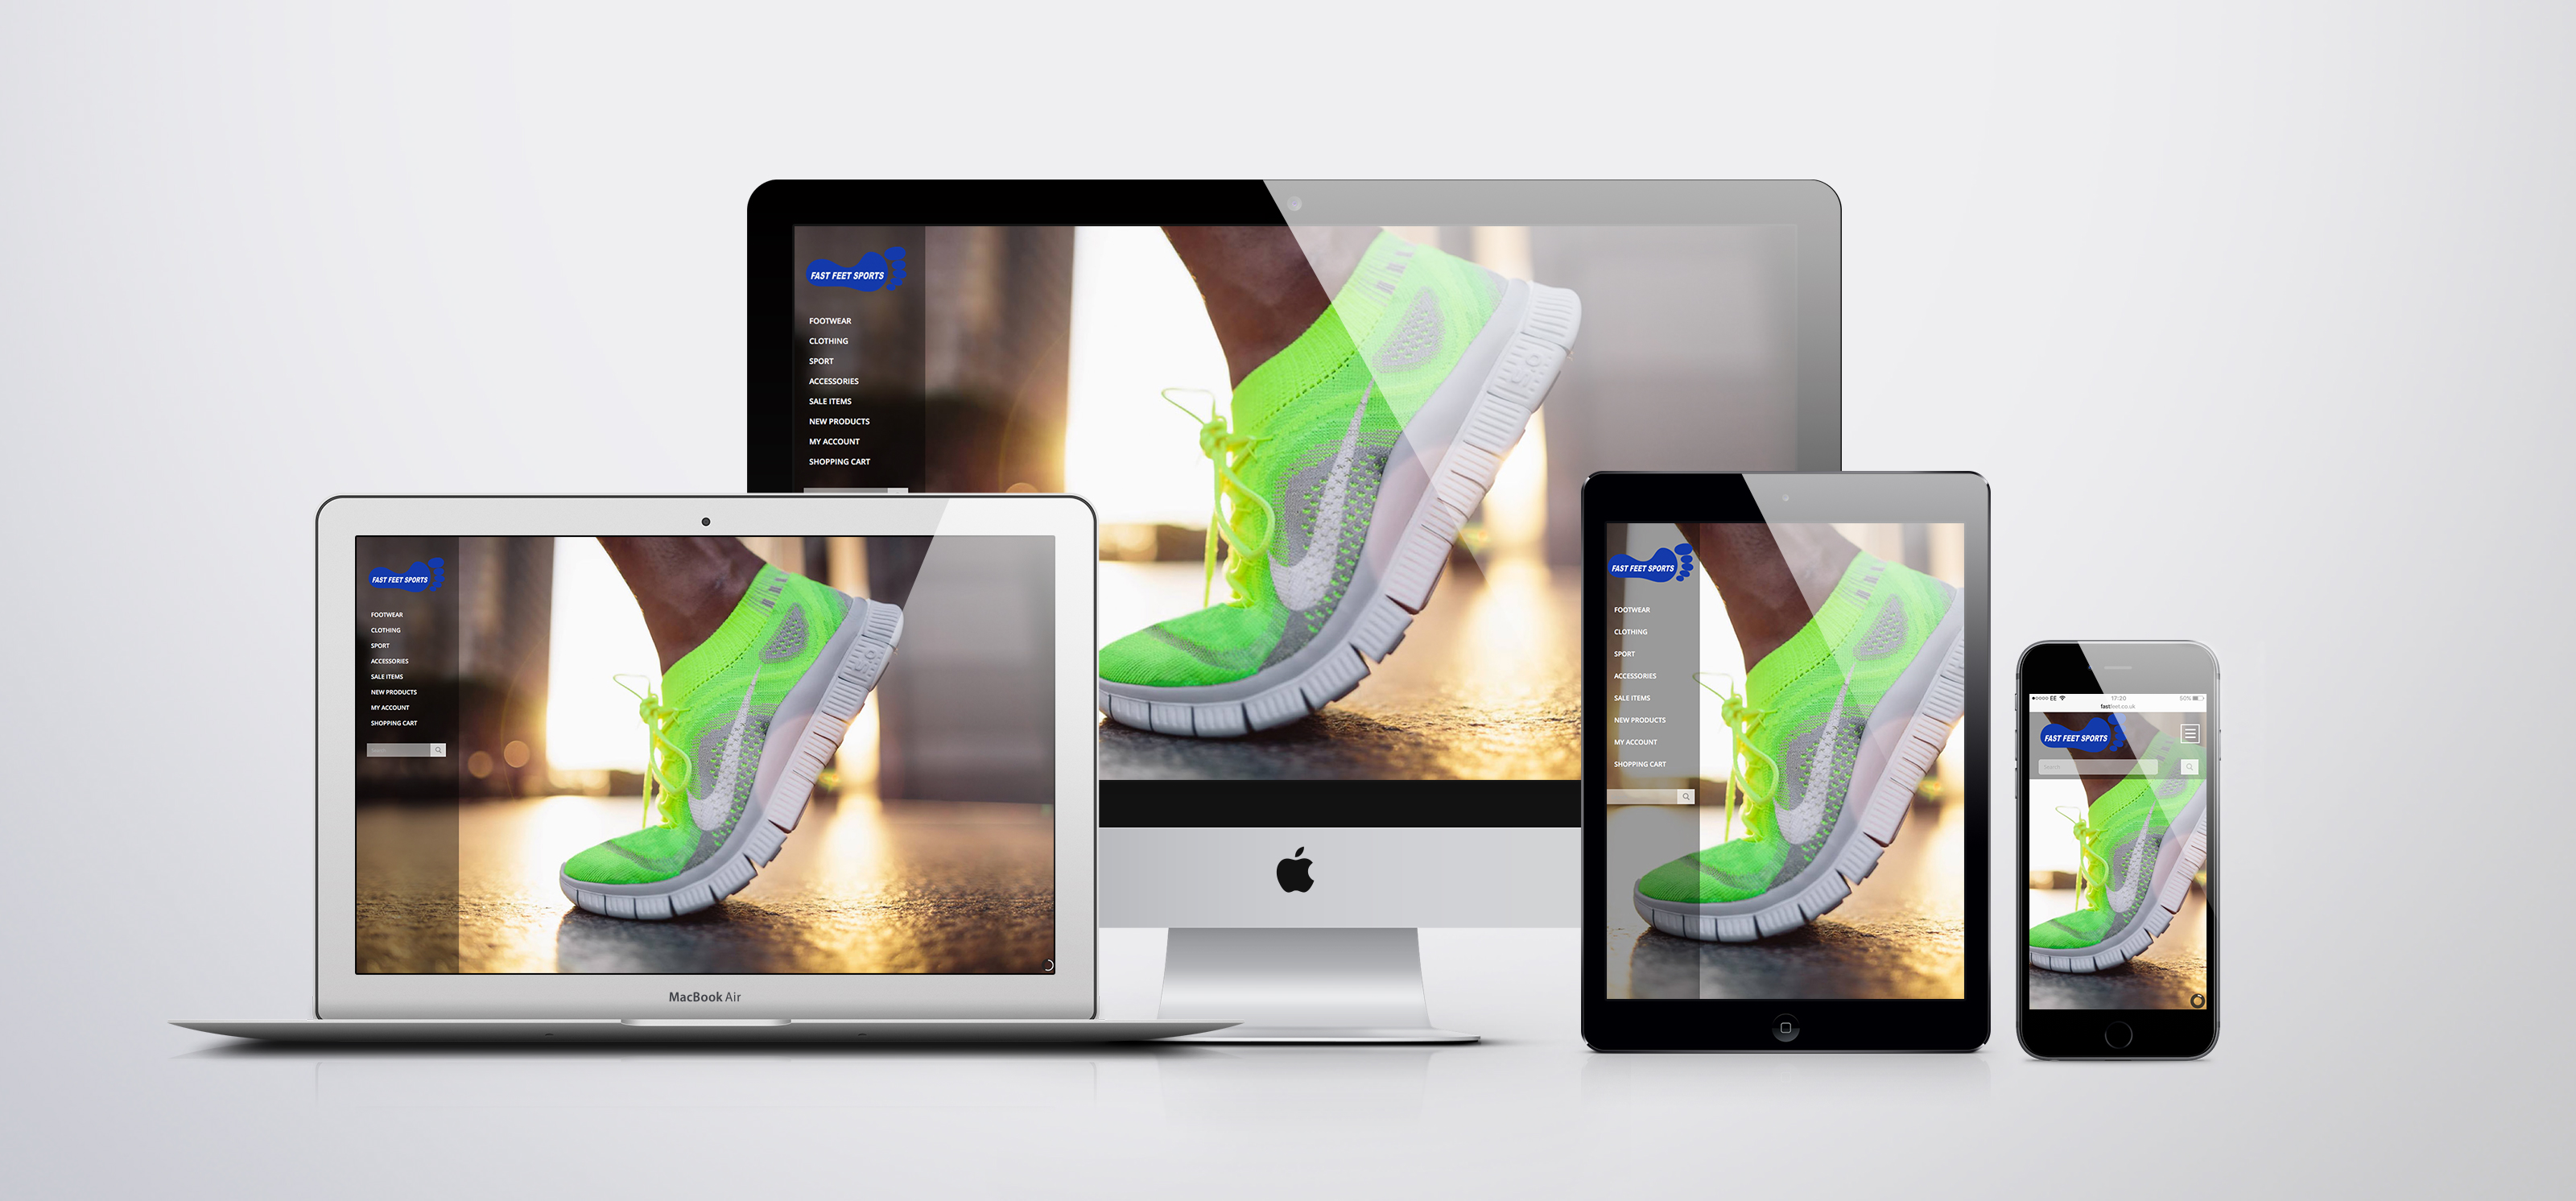 Fast Feet website shown on multiple devices